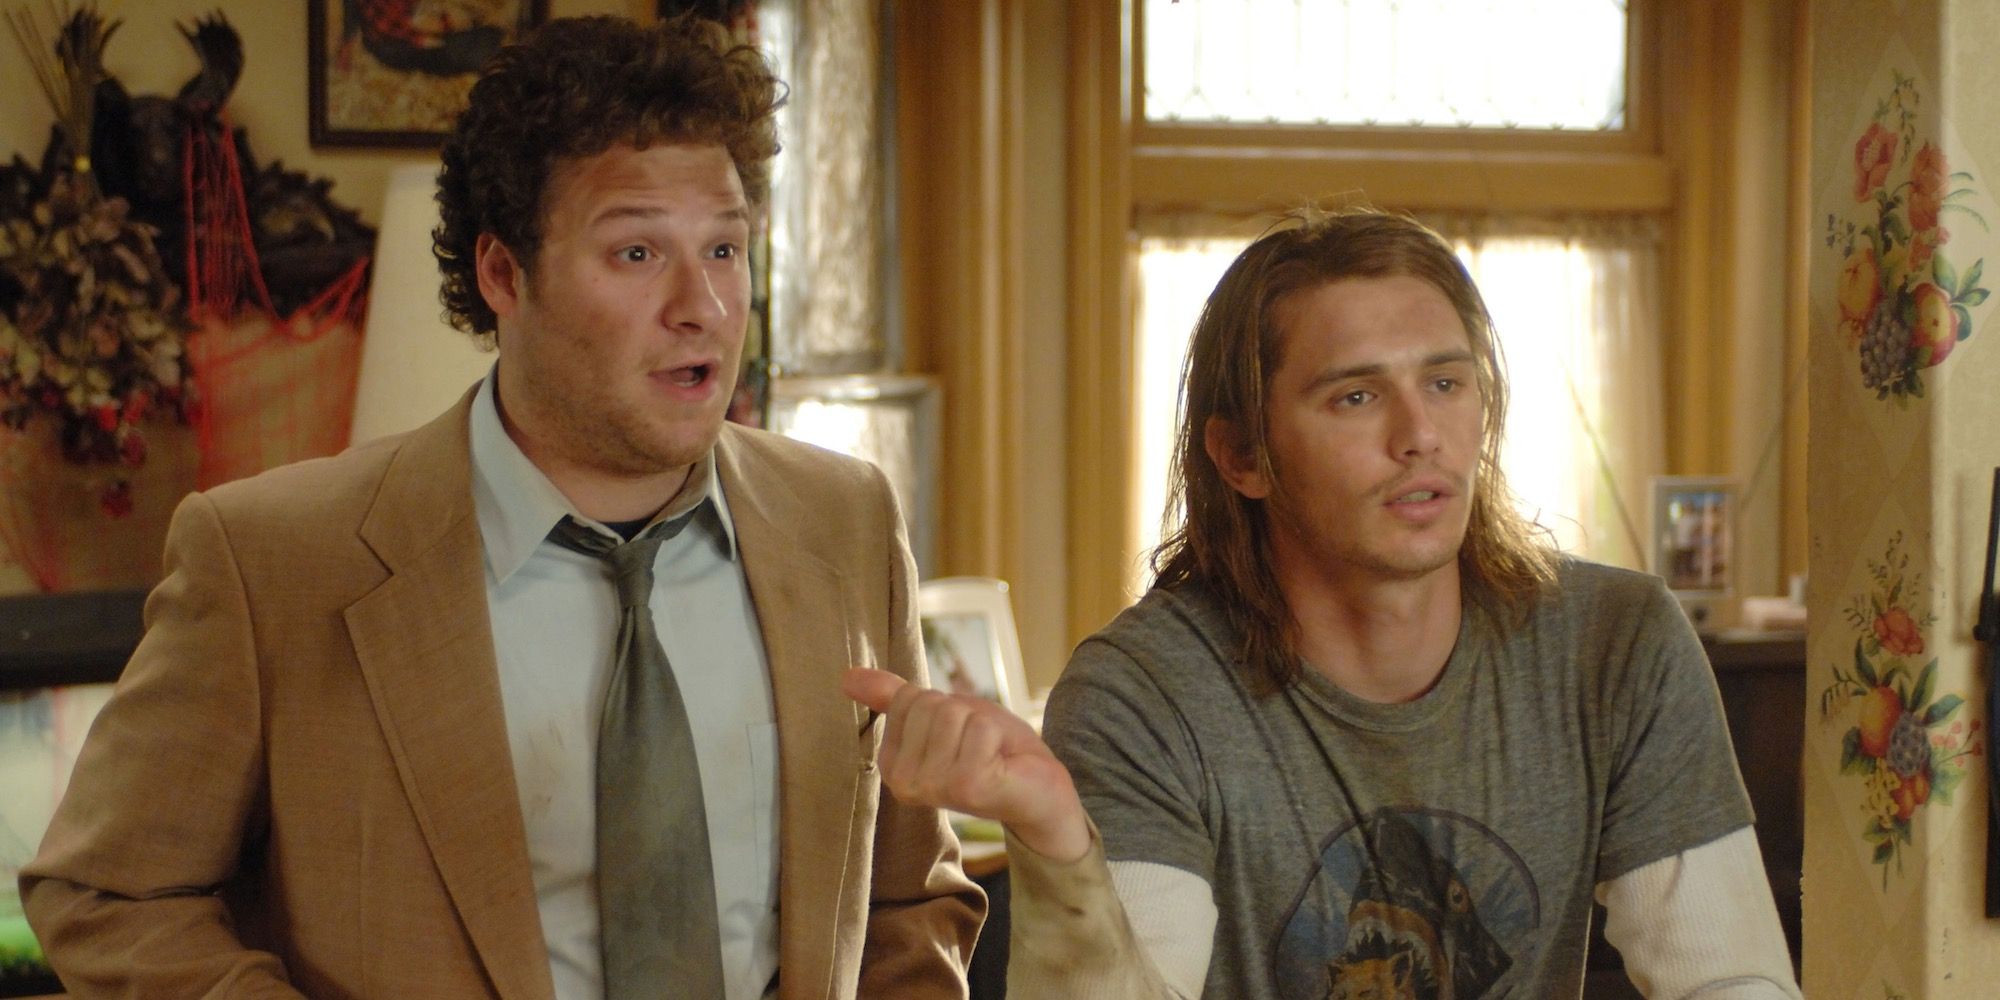 Seth Rogen and James Franco in Pineapple Express